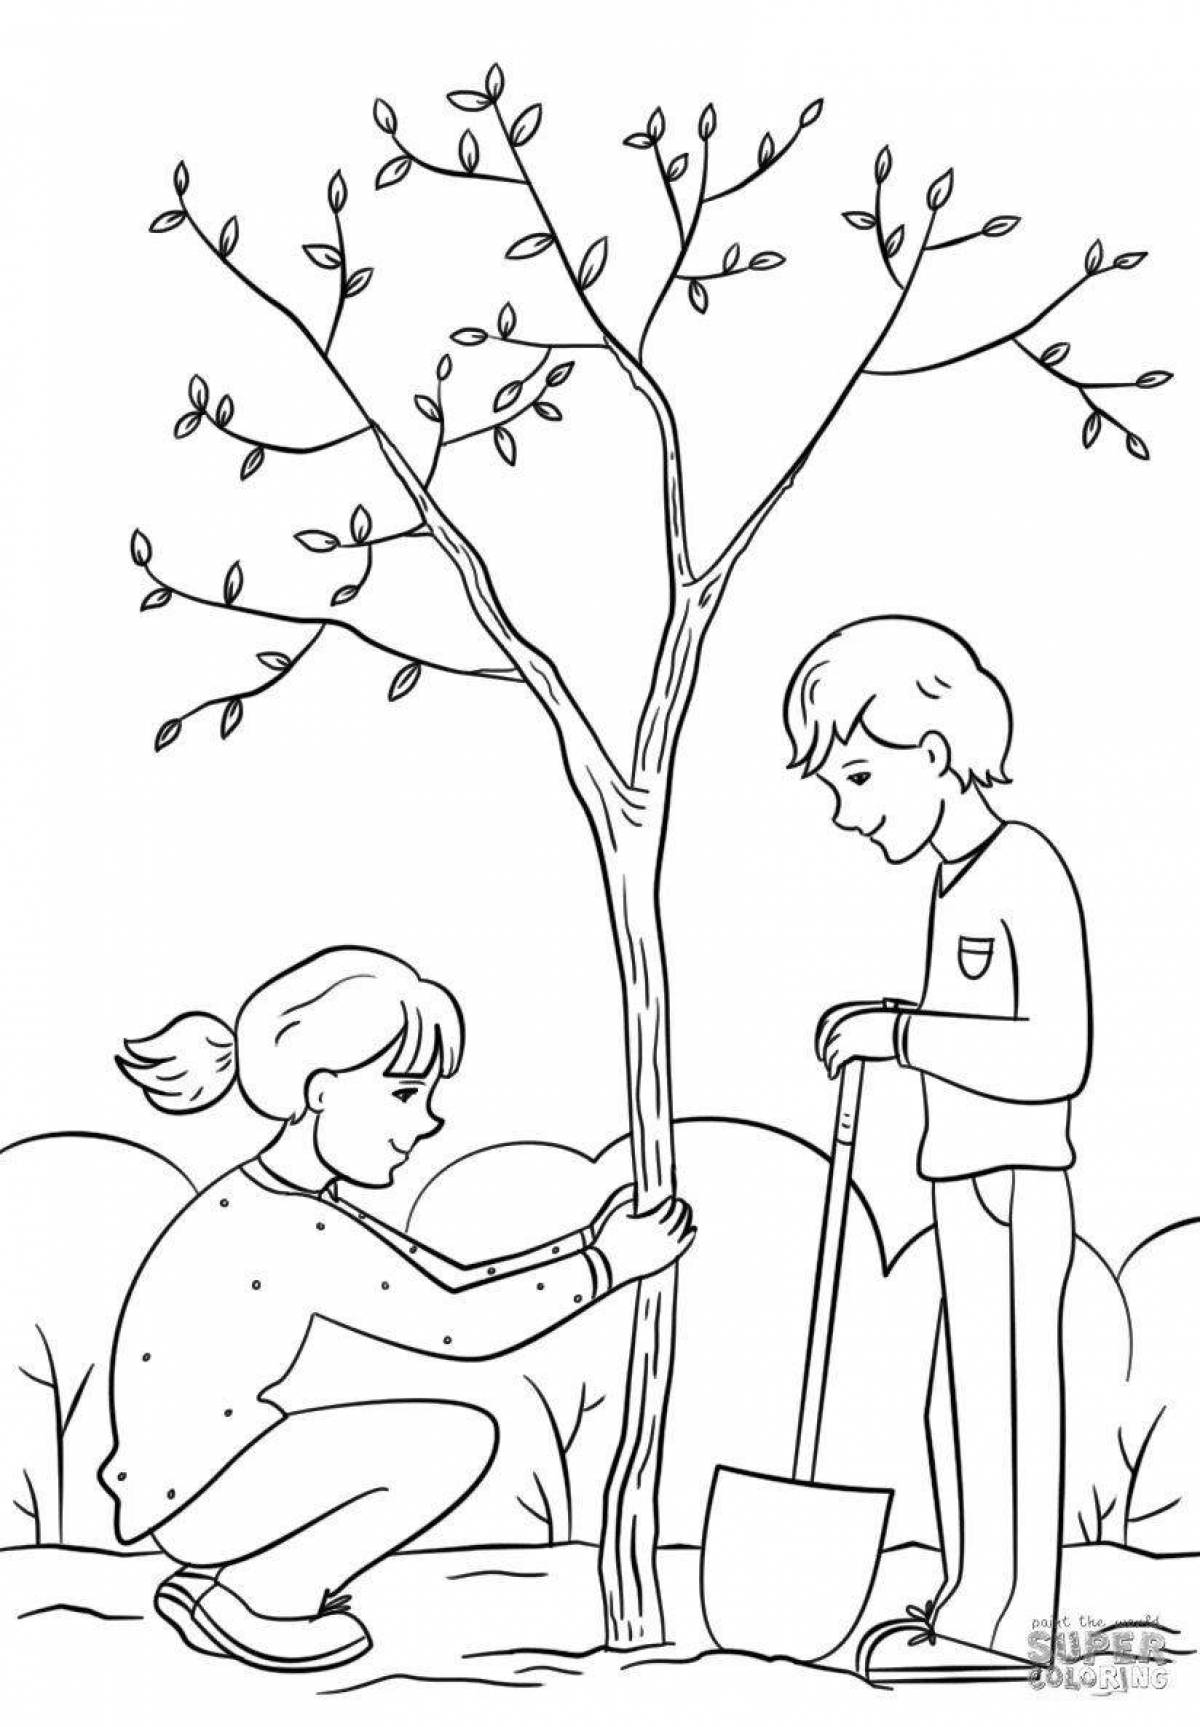 Amazing coloring page without worries